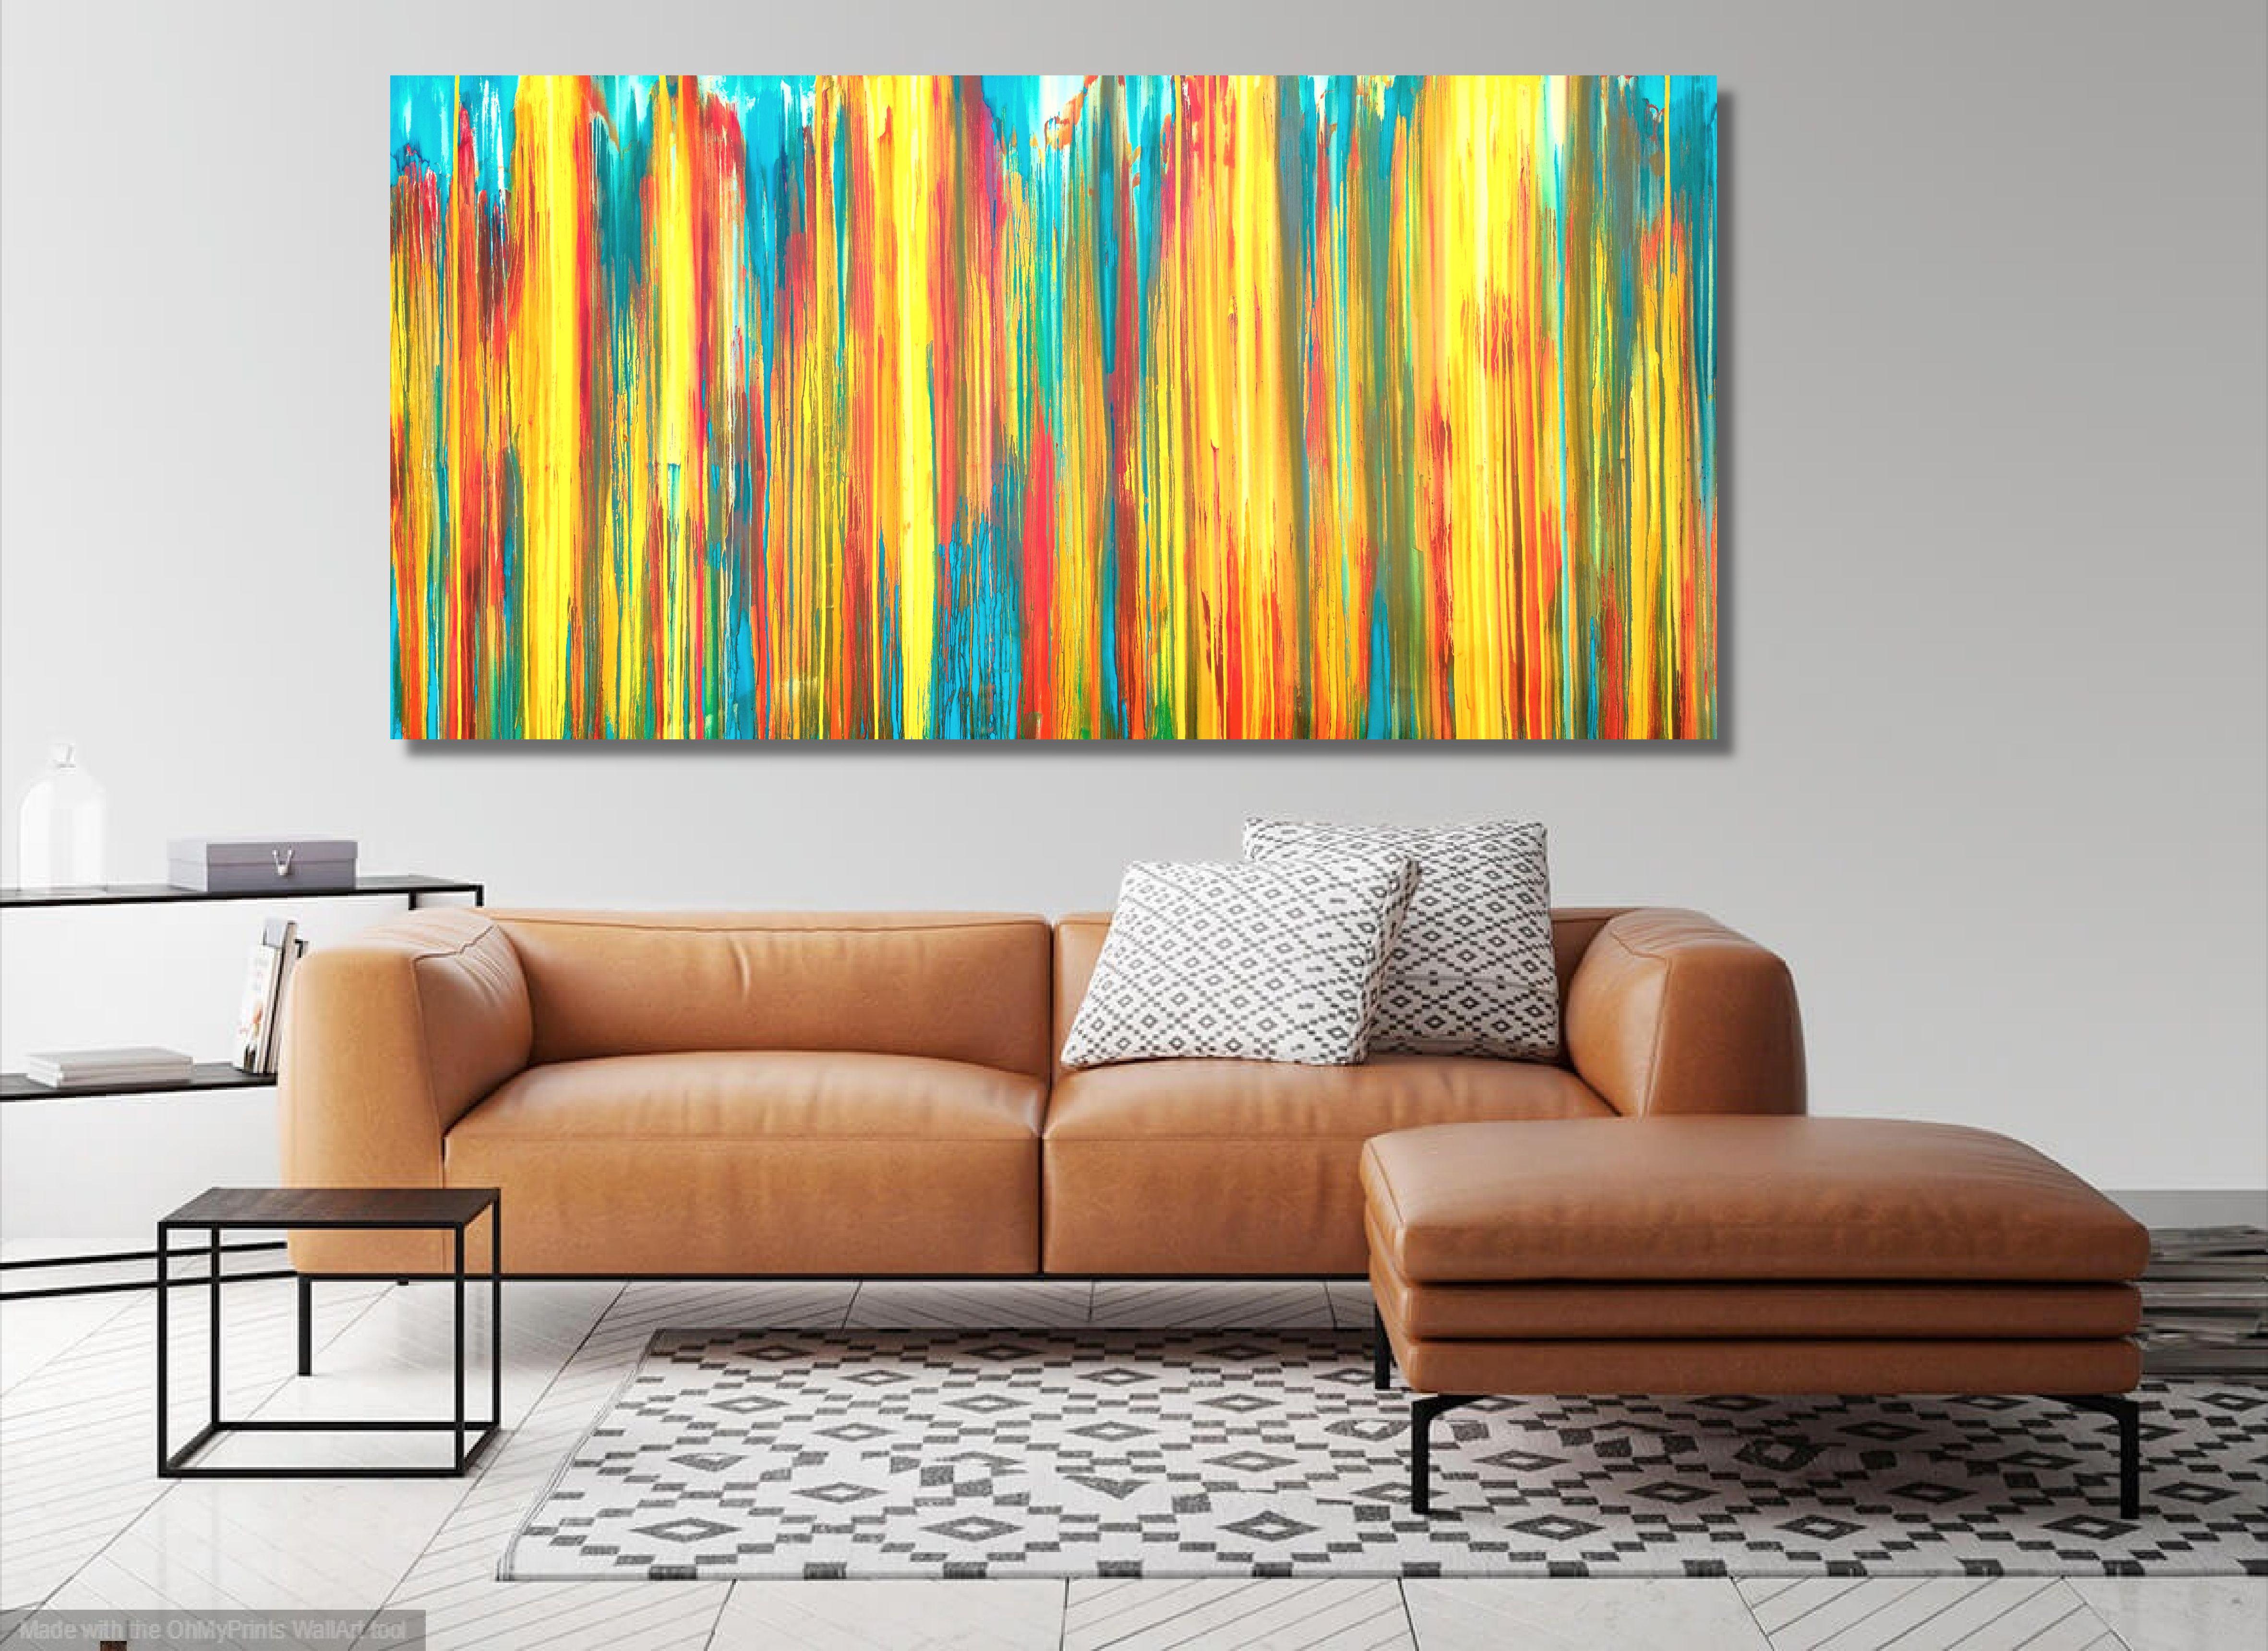 The Emotional Creation #323, Painting, Acrylic on Canvas - Orange Abstract Painting by Carla Sá Fernandes